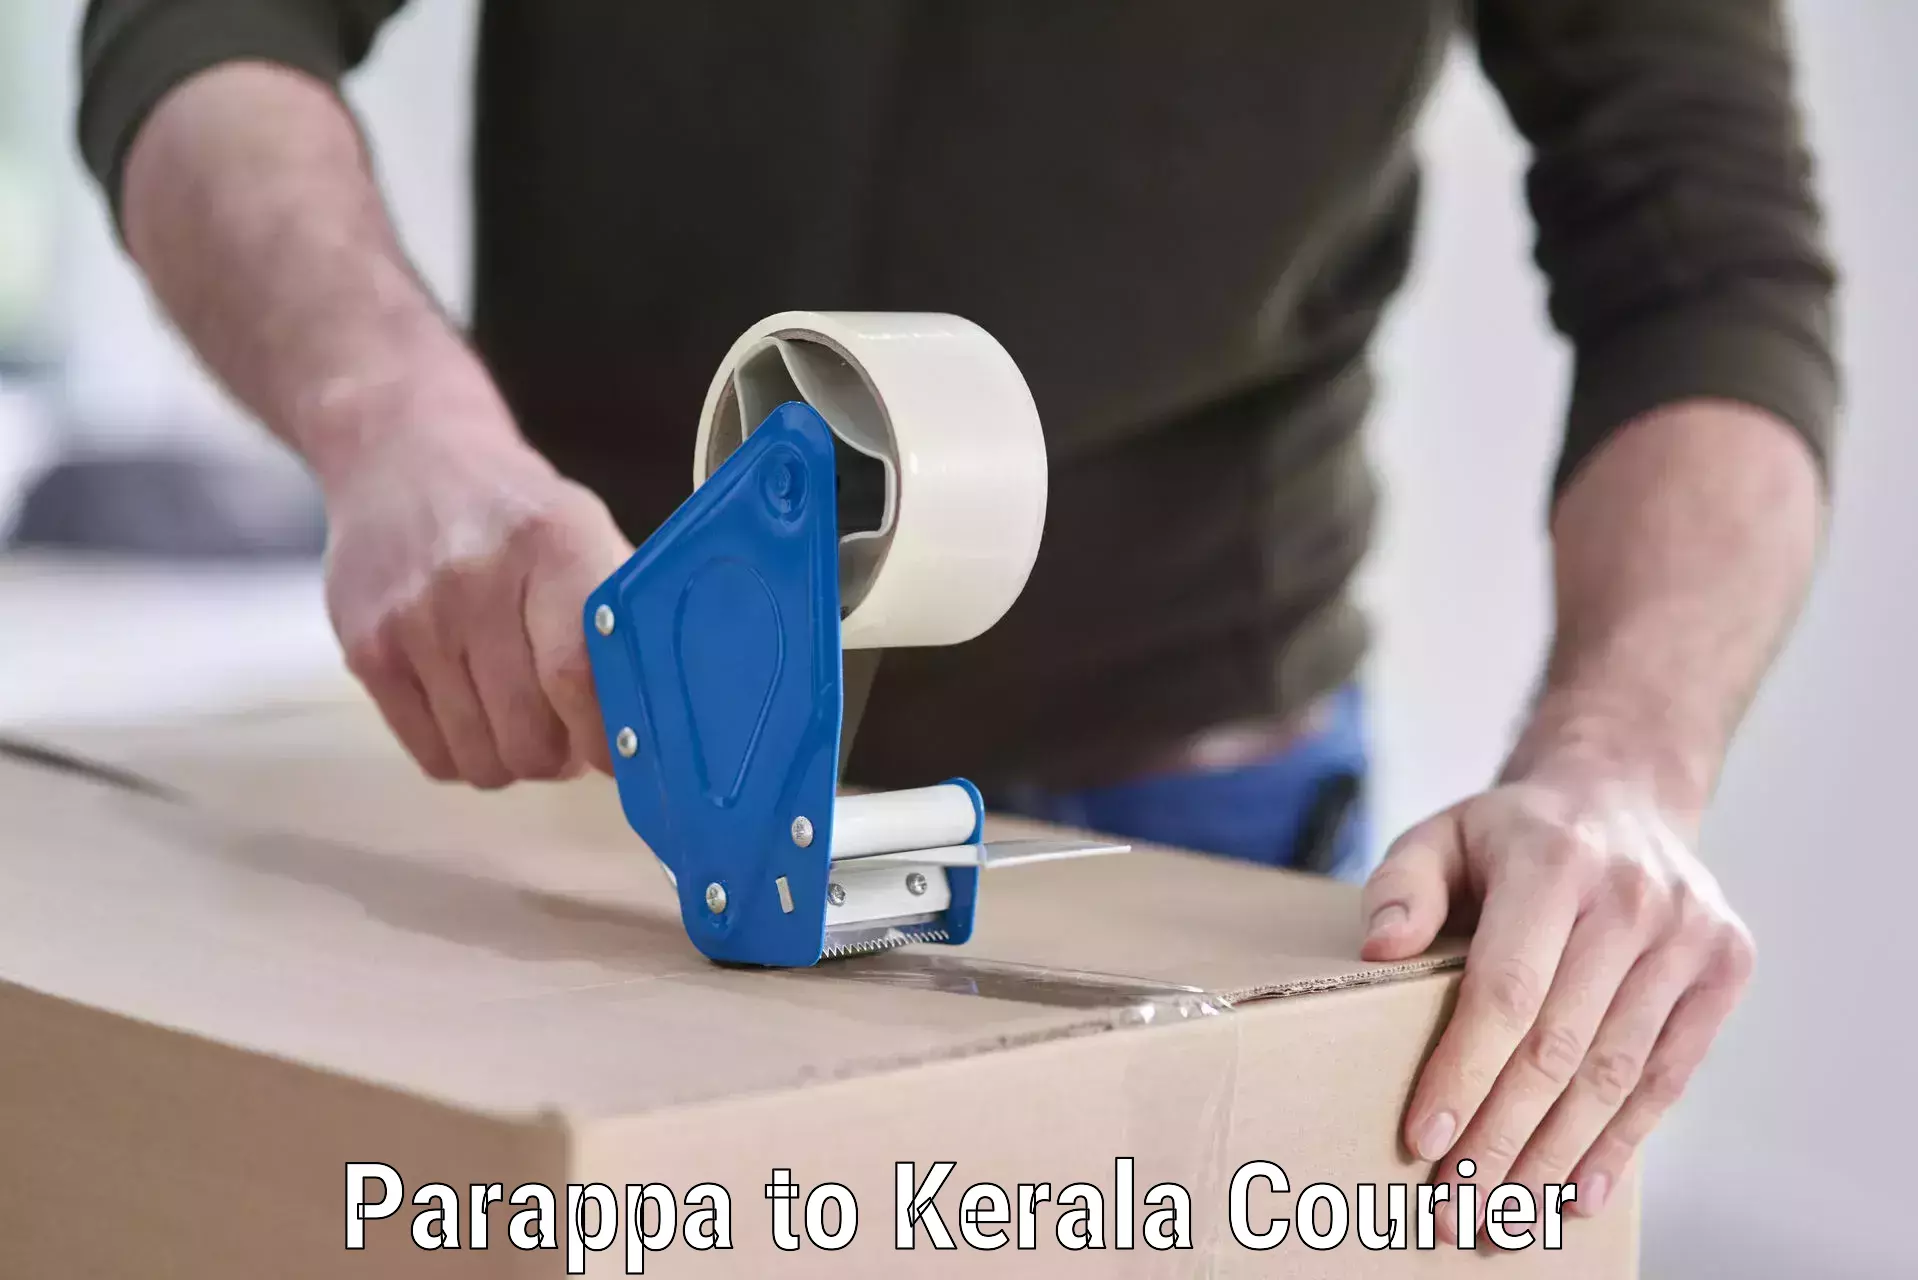 Professional packing services in Parappa to Kanhangad